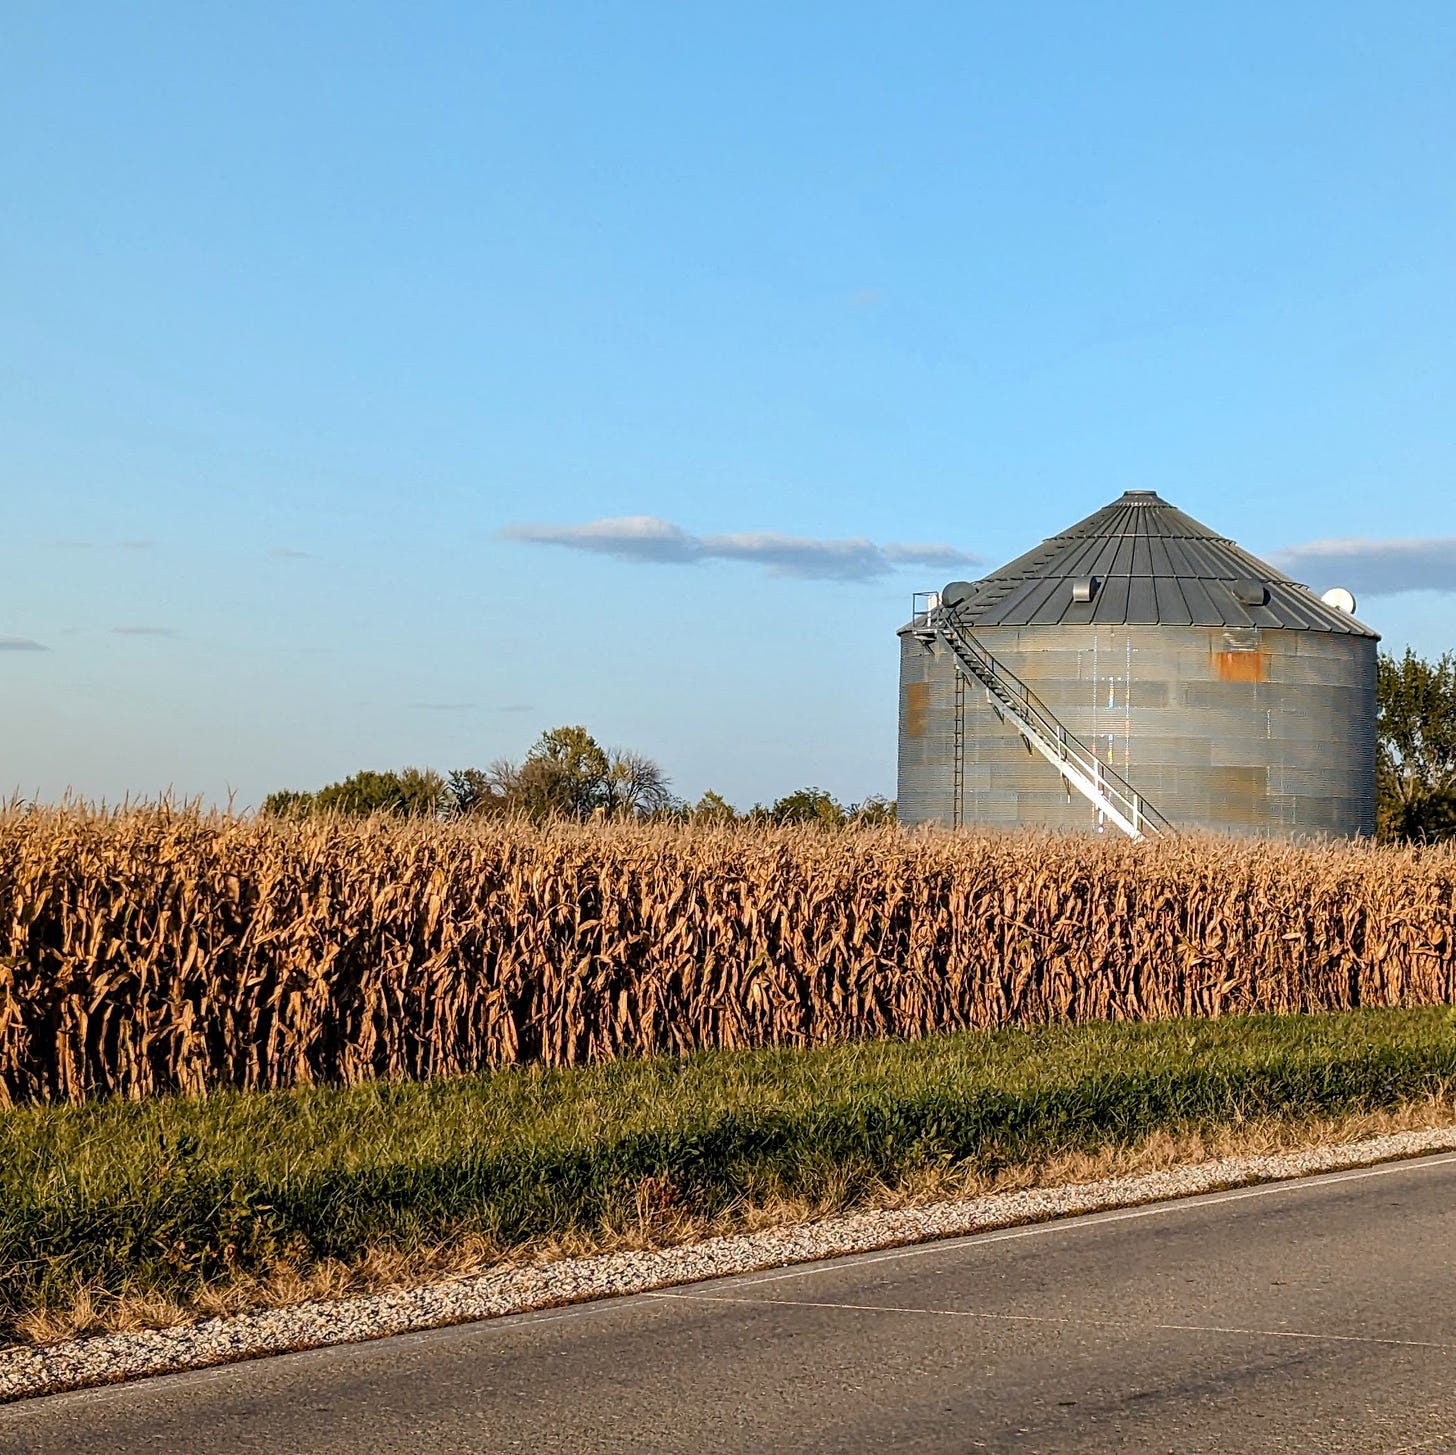 Rows of corn, brown and ready to harvest, with a grain bin behind it and a blue sky